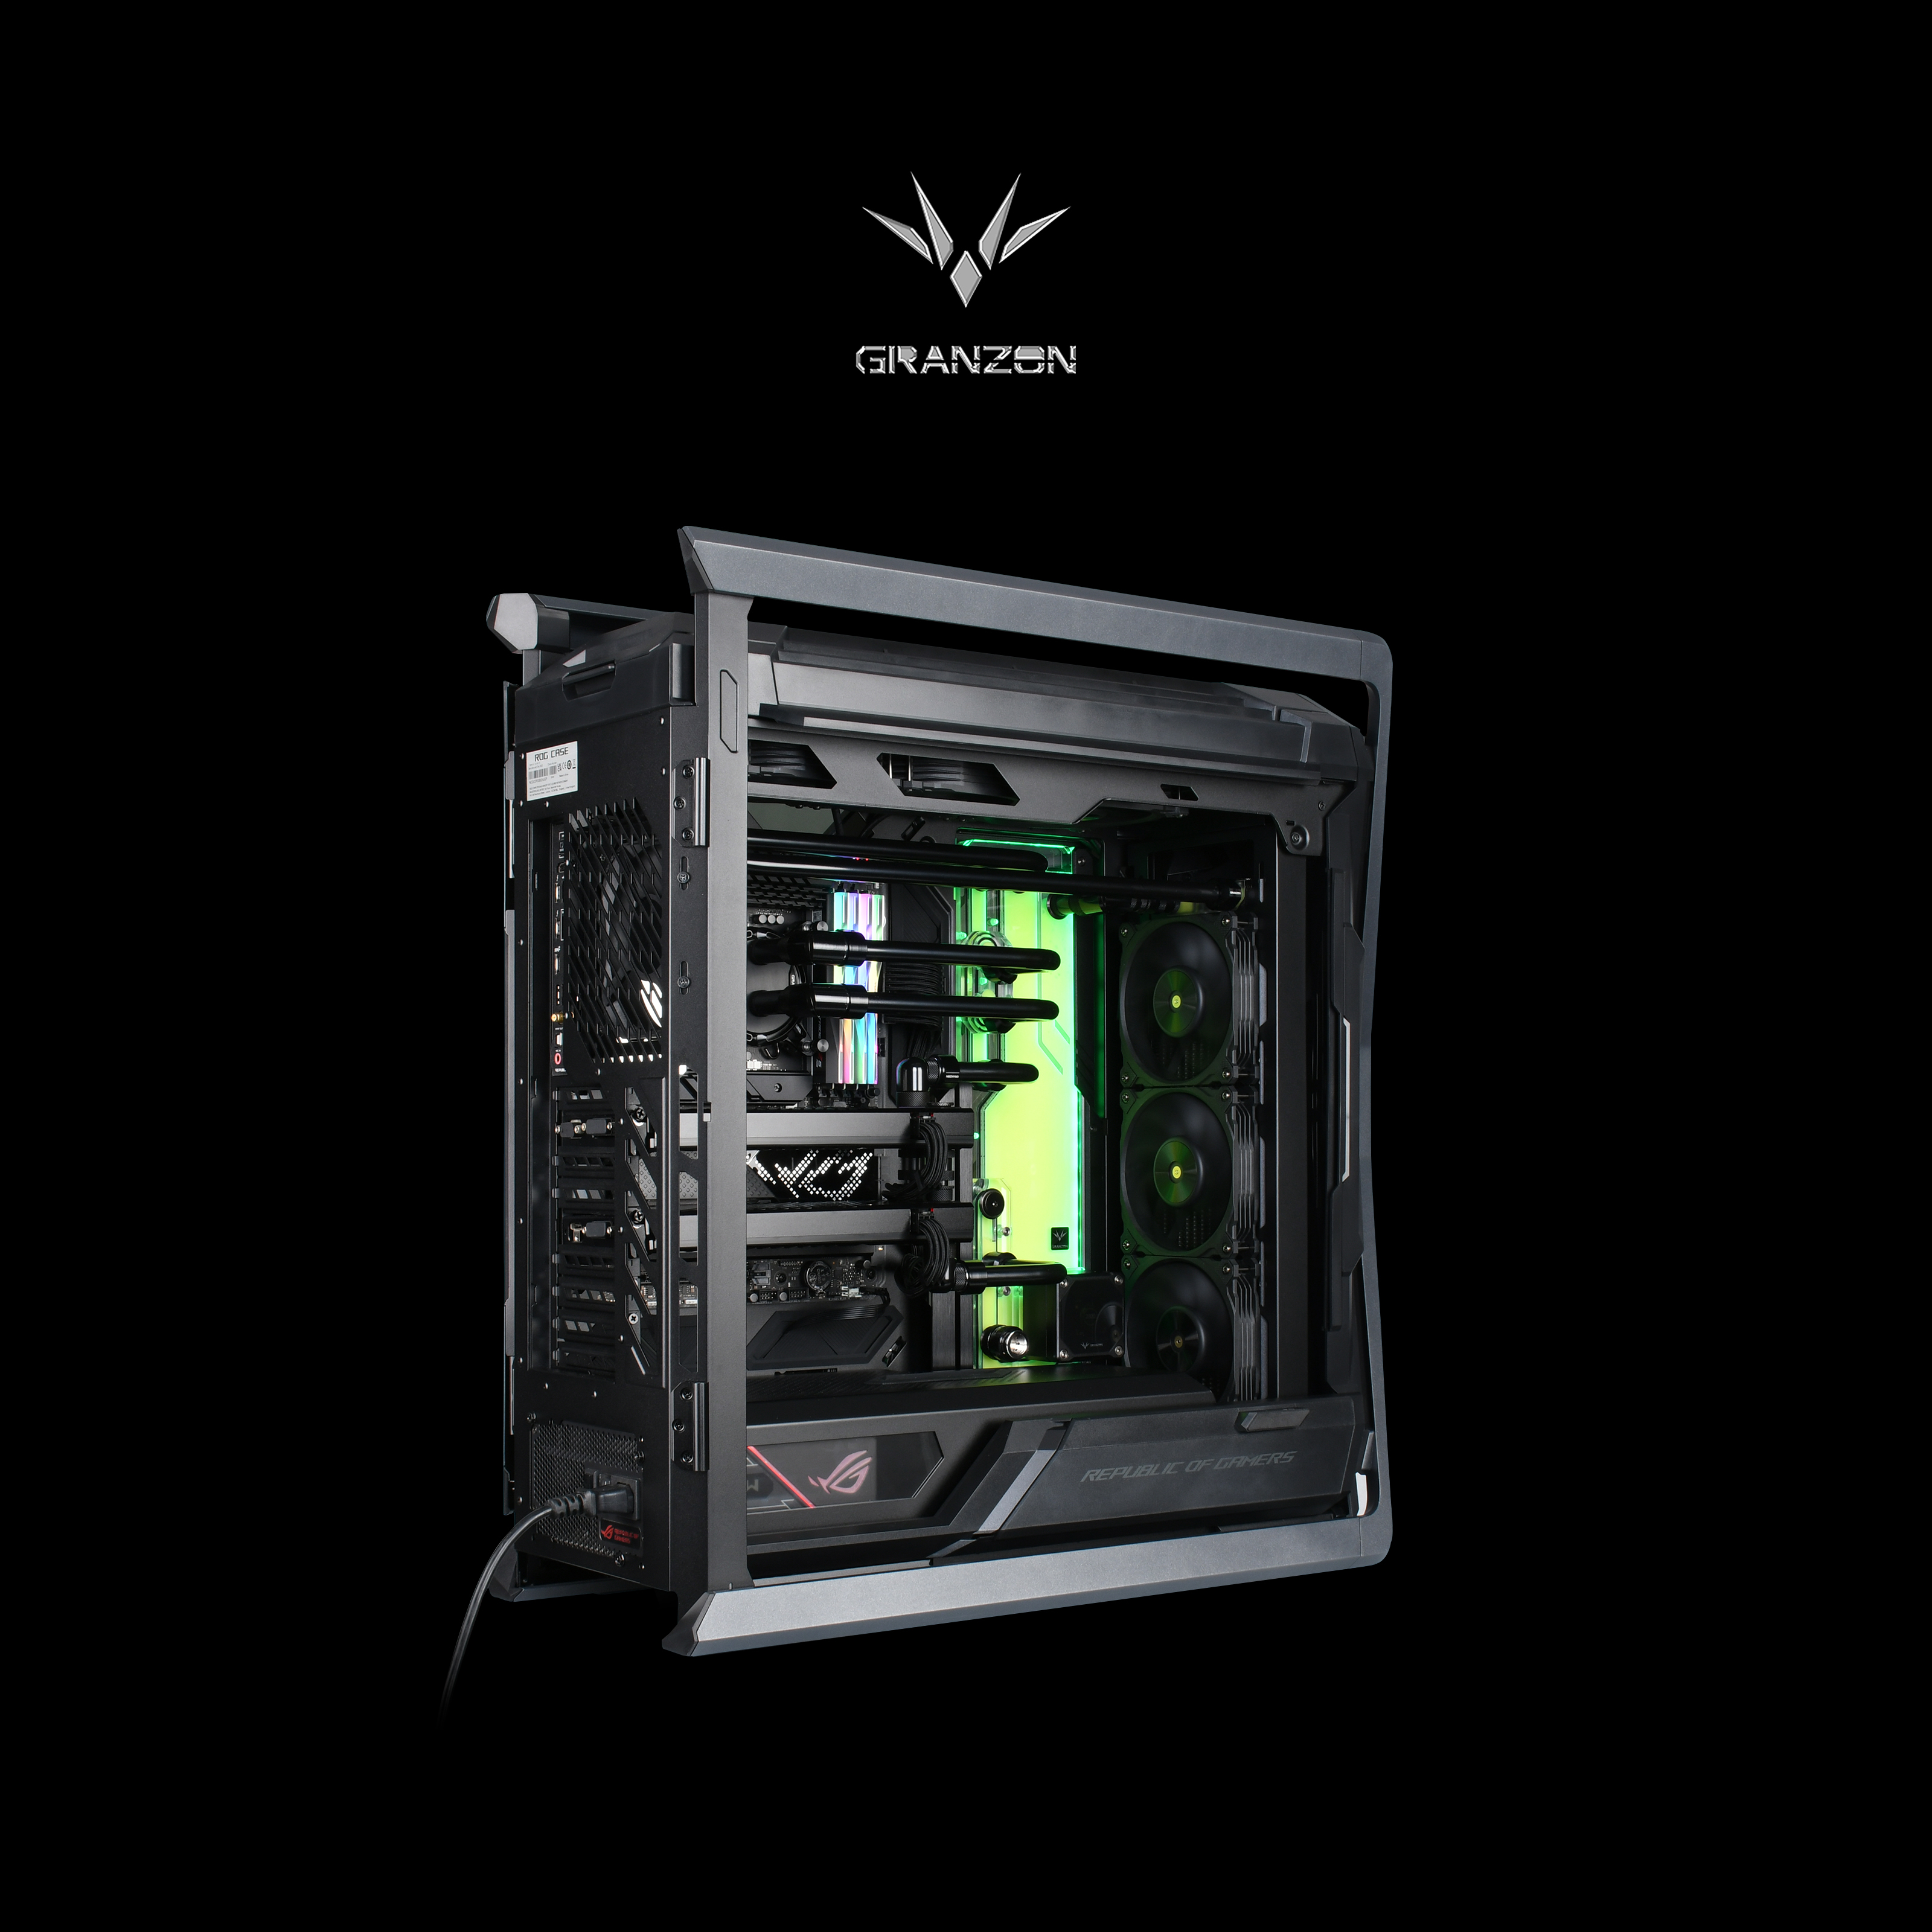 https://images.51microshop.com/860/product/20230425/Granzon_Advanced_Distro_Plate_Kit_For_Asus_ROG_Hyperion_GR701_Case_5V_A_RGB_Complete_Loop_For_Single_GPU_PC_Building_Water_Cooling_Waterway_Board_GC_AS_GR701_1682413794216_2.jpg